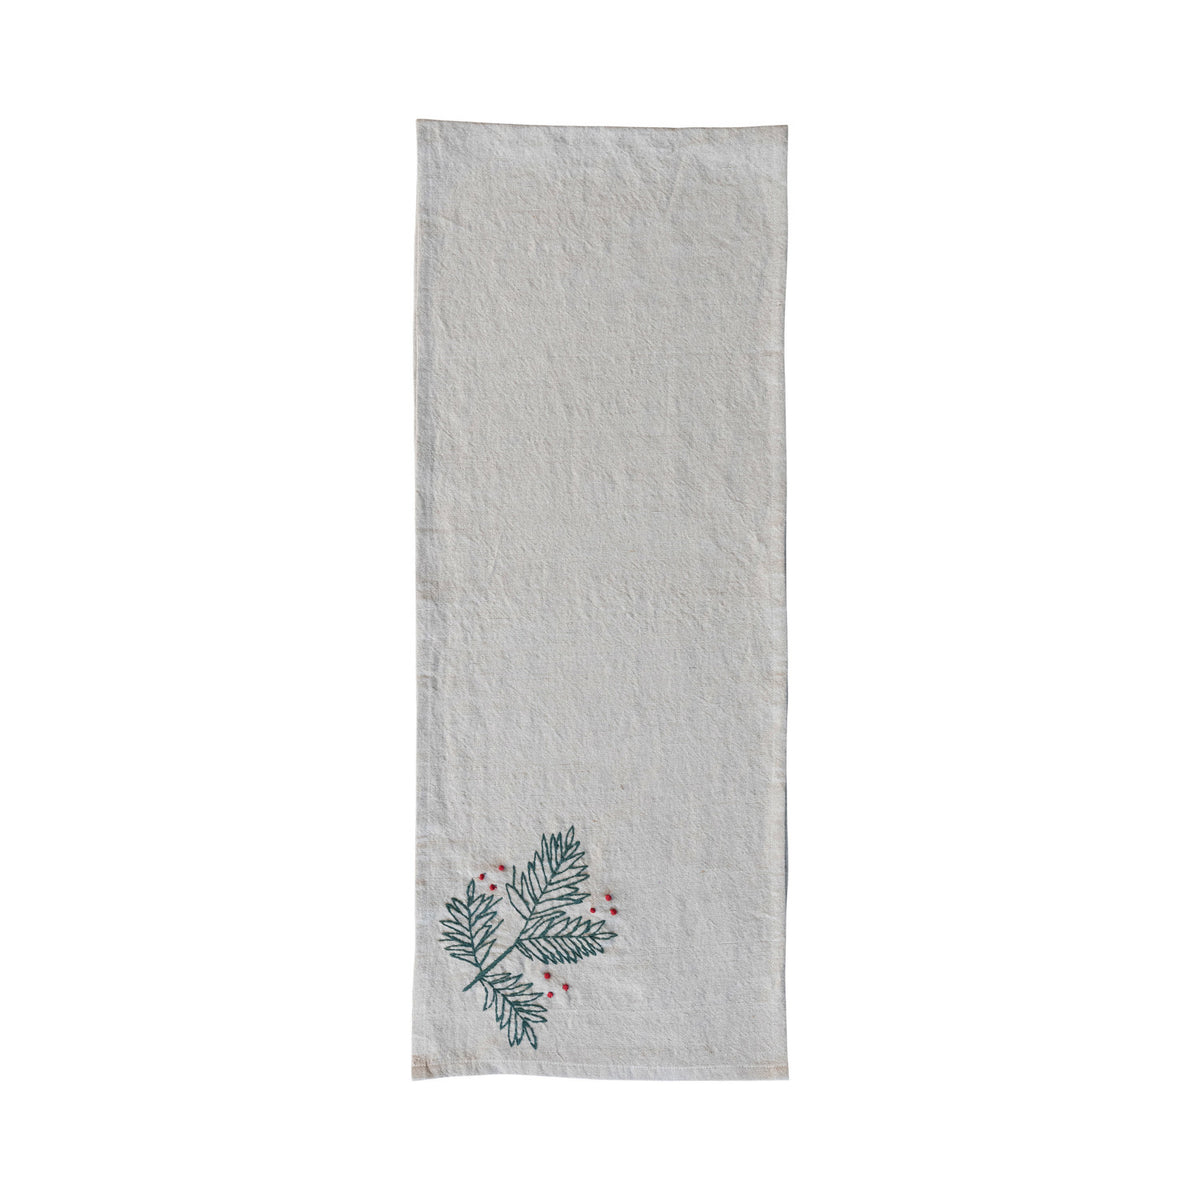 Woven Cotton & Linen Table Runner w/ Hand-Embroidered Holly & French Knots